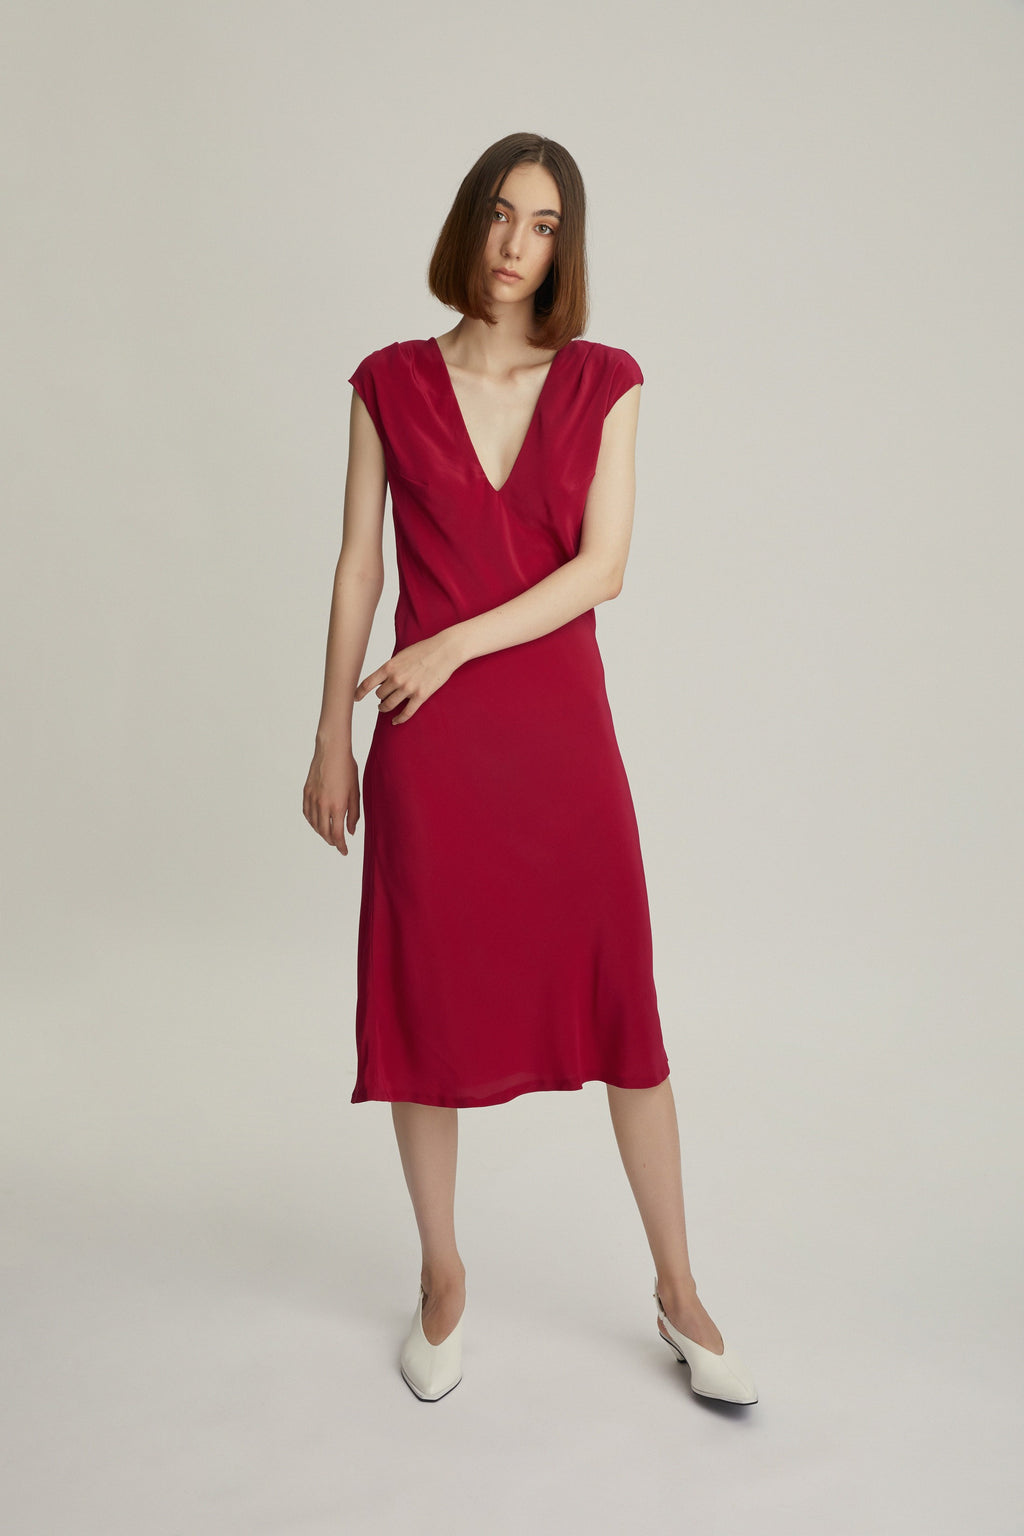 The Popping Pink Silk dress is a lightweight, slip-on style that slightly flares towards the hem for a clean silhouette.   Made from fluid 100% silk with a smooth quality, this slip dress is designed with an elegant deep V-neck.The twisted back detail was added as a statement to a polished look. 